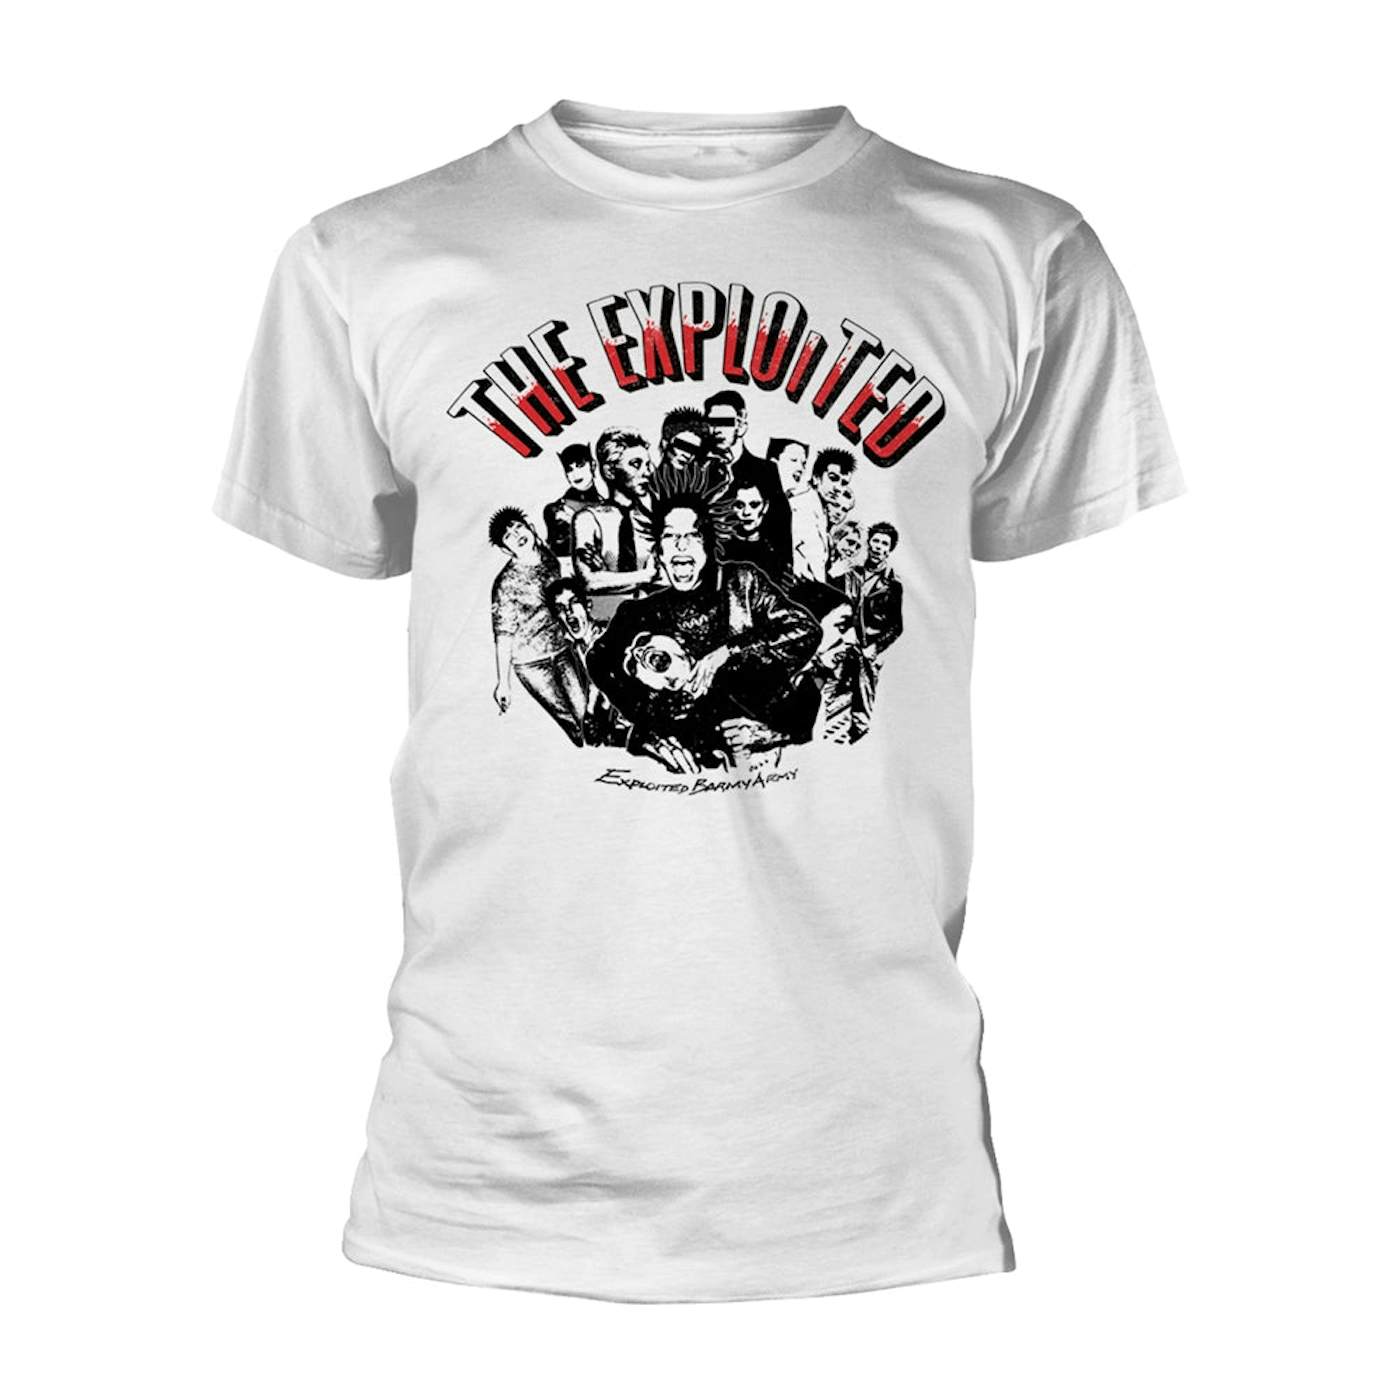 The Exploited T Shirt - Barmy Army (White)